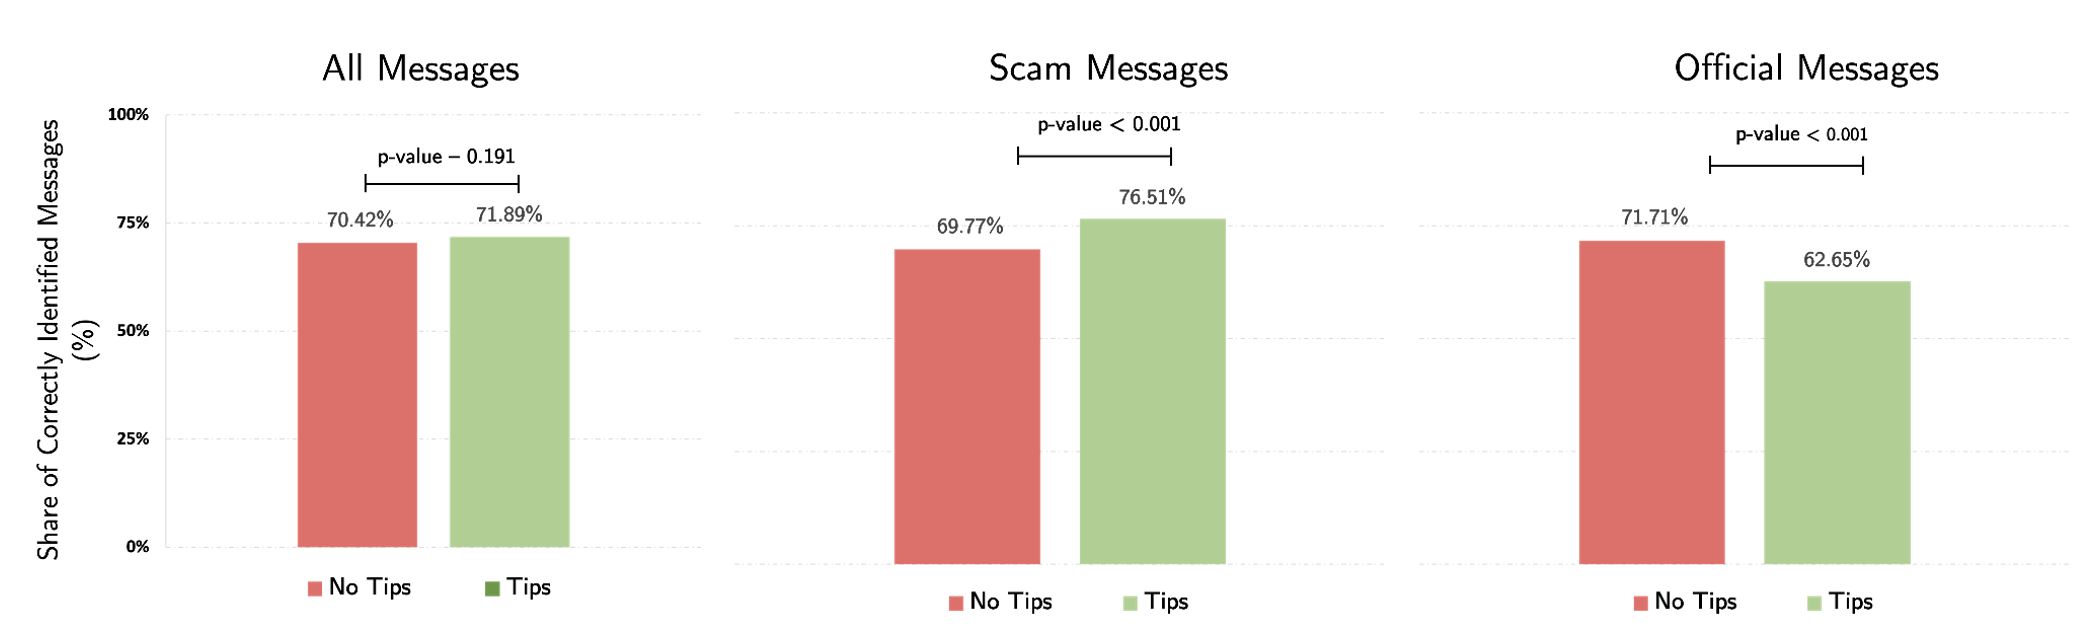 Figure 3 Effect of the tips treatment on the share of correctly identified messages, the share of correctly identified scam messages, and the share of correctly identified official messages